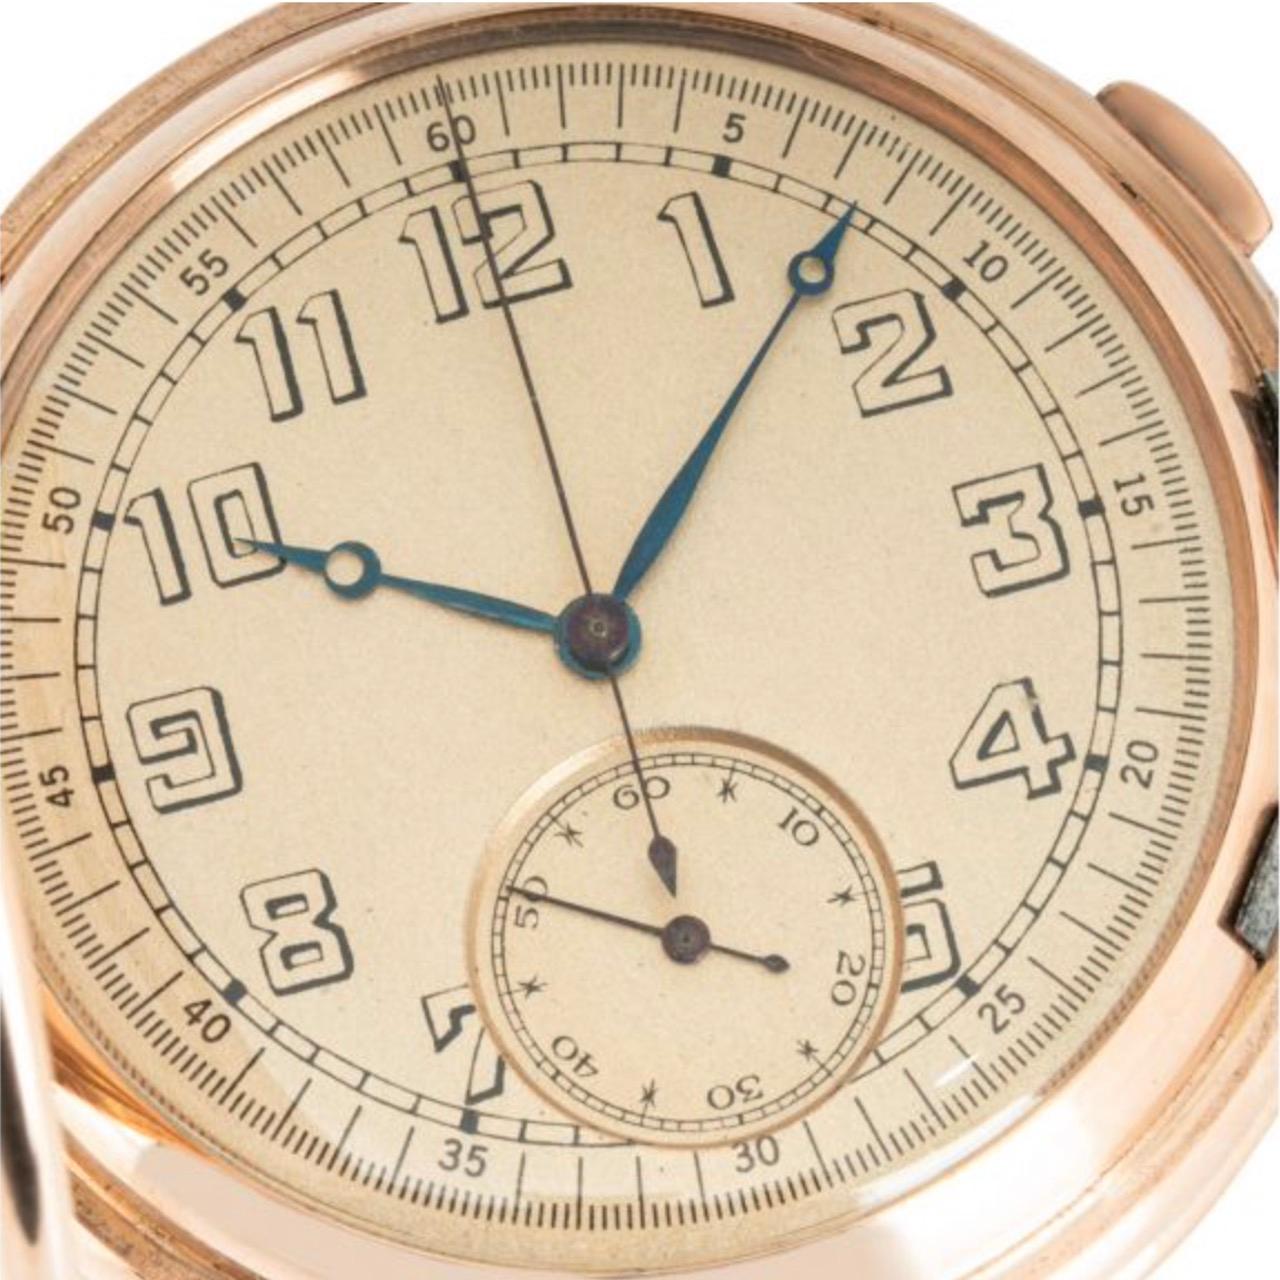 Invicta. A Swiss Full Hunter 55mm 14ct Rose Gold Minute Repeater Chronograph Keyless Lever Pocket Watch.

Dial: The Excellent Champagne dial with unusual skeleton style Arabic numerals and outer minute track. The Breguet moon style blued steel hands